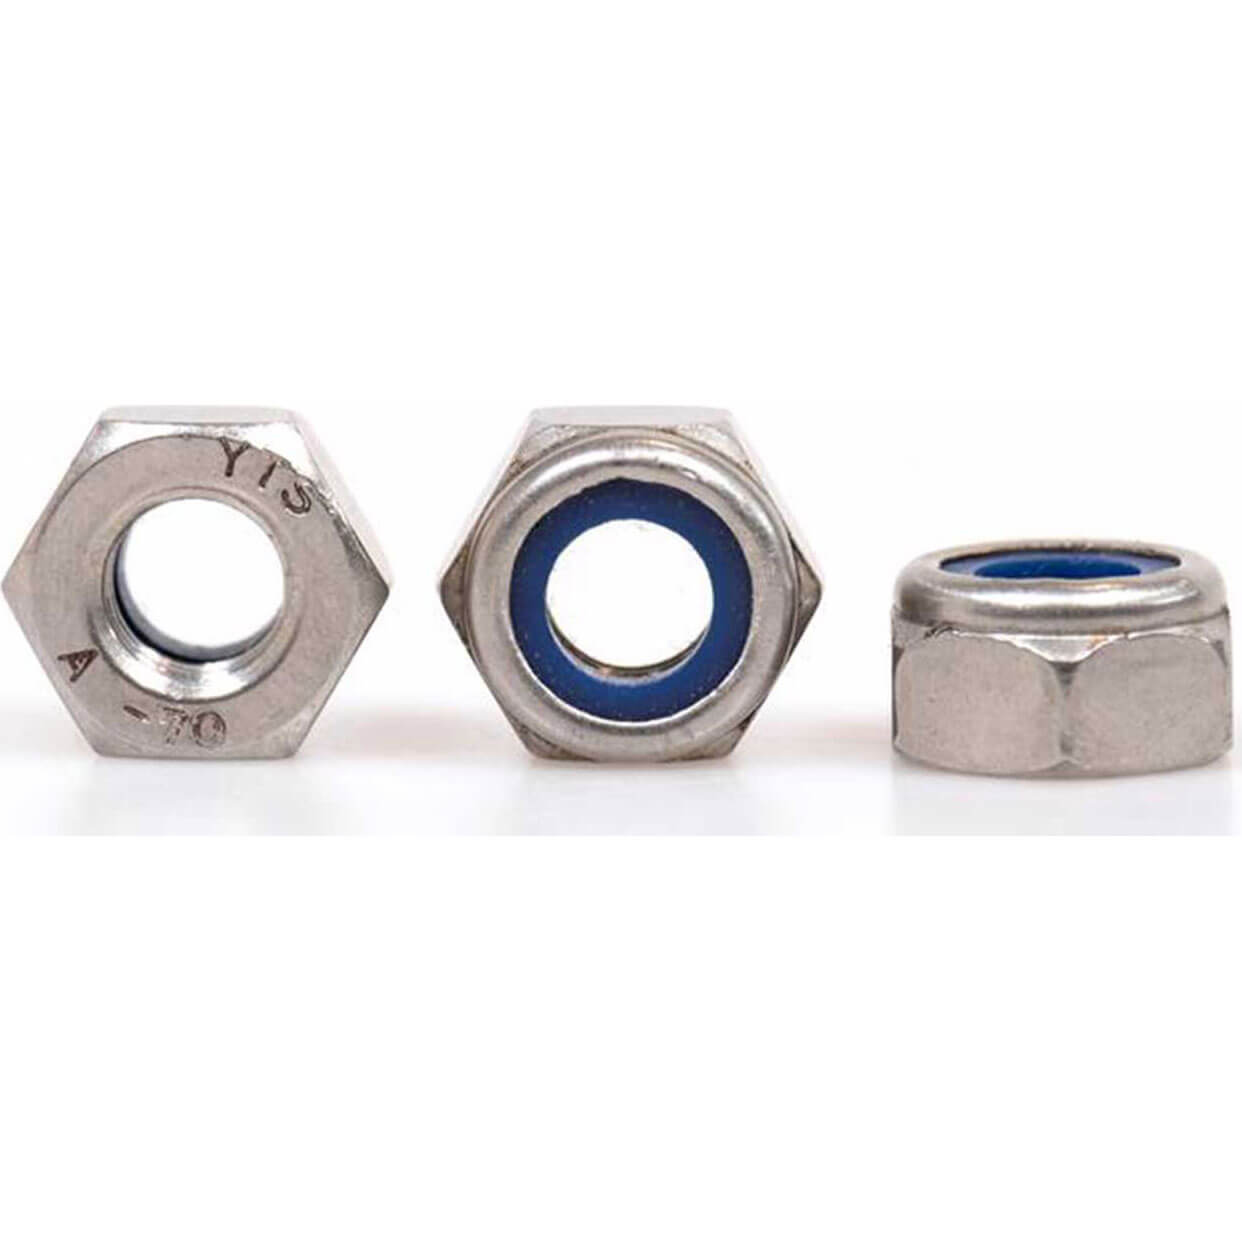 Image of Sirius A4 316 Stainless Steel Nyloc Nuts M3